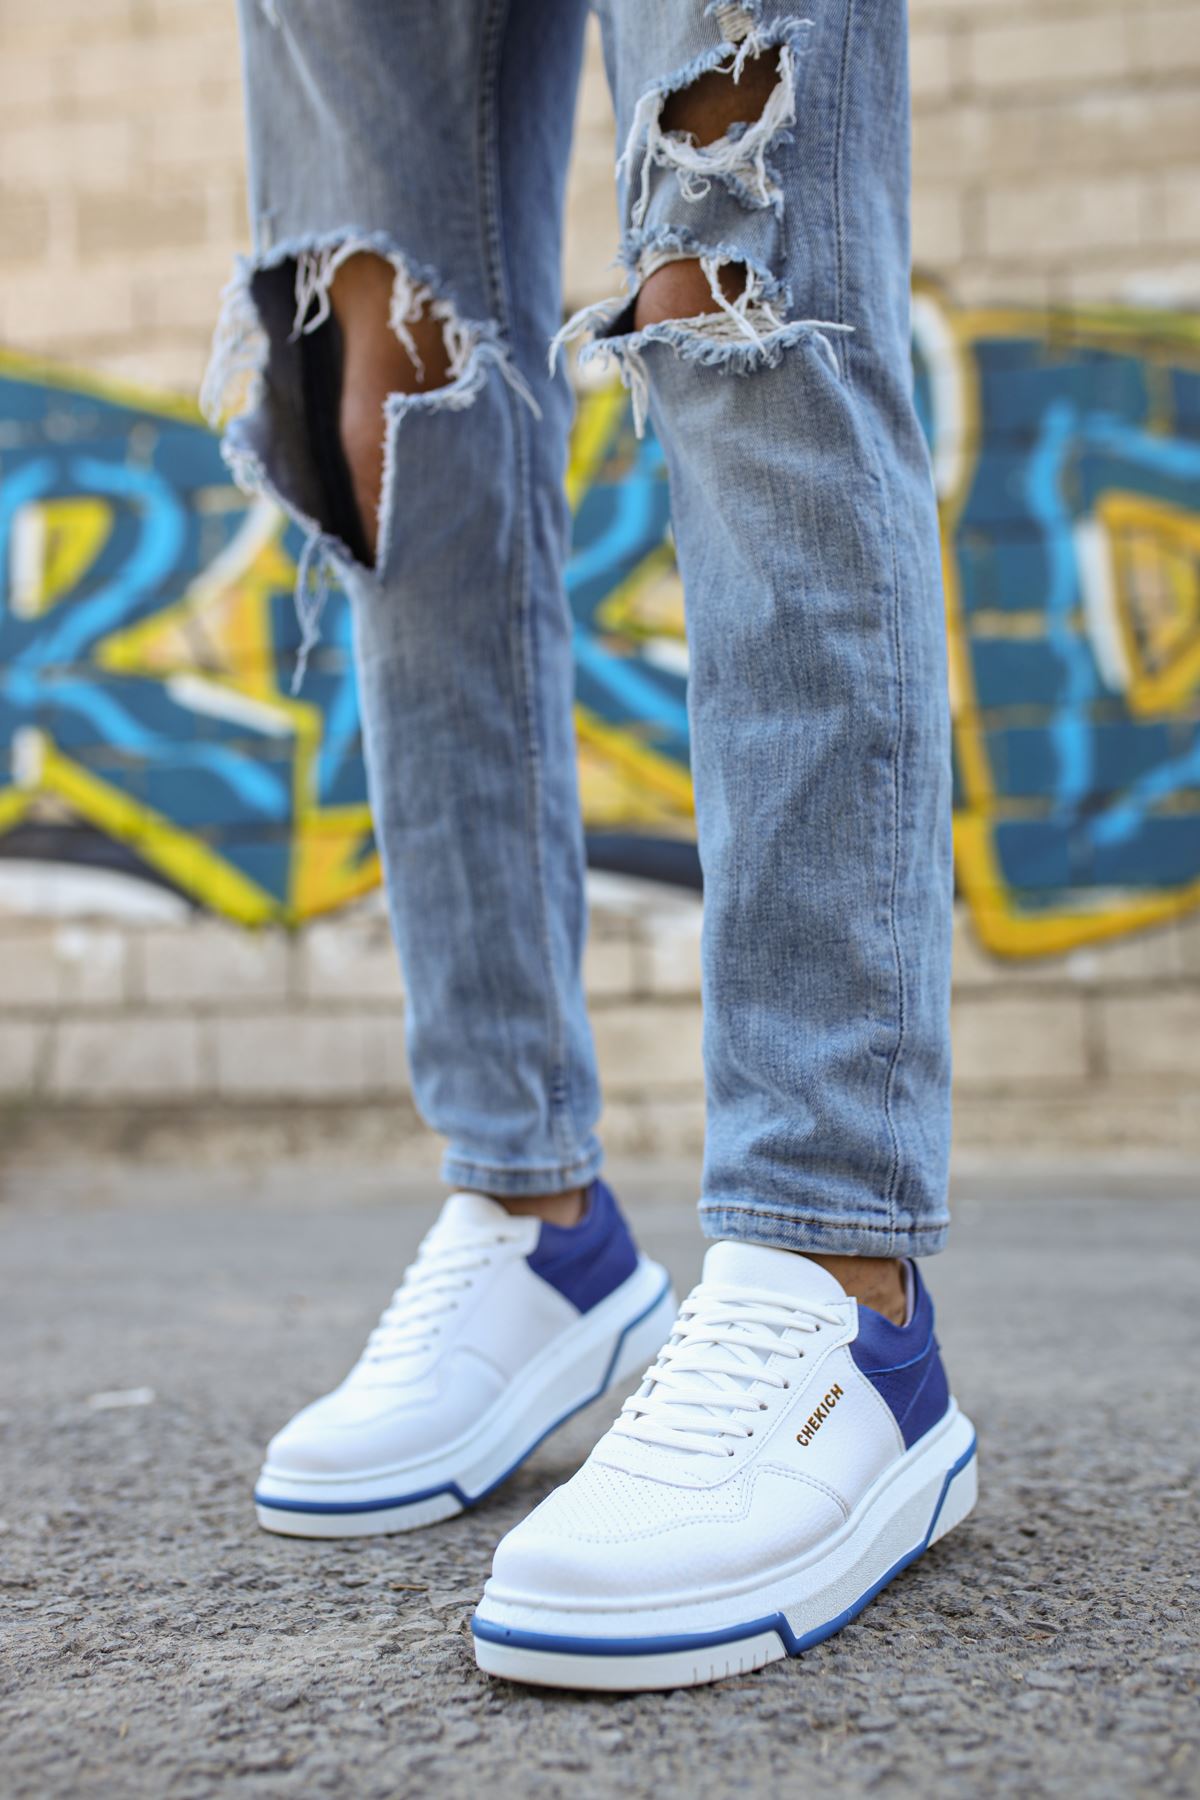 CH075 Men's Unisex White-Blue Casual Sneaker Sports Shoes - STREETMODE ™